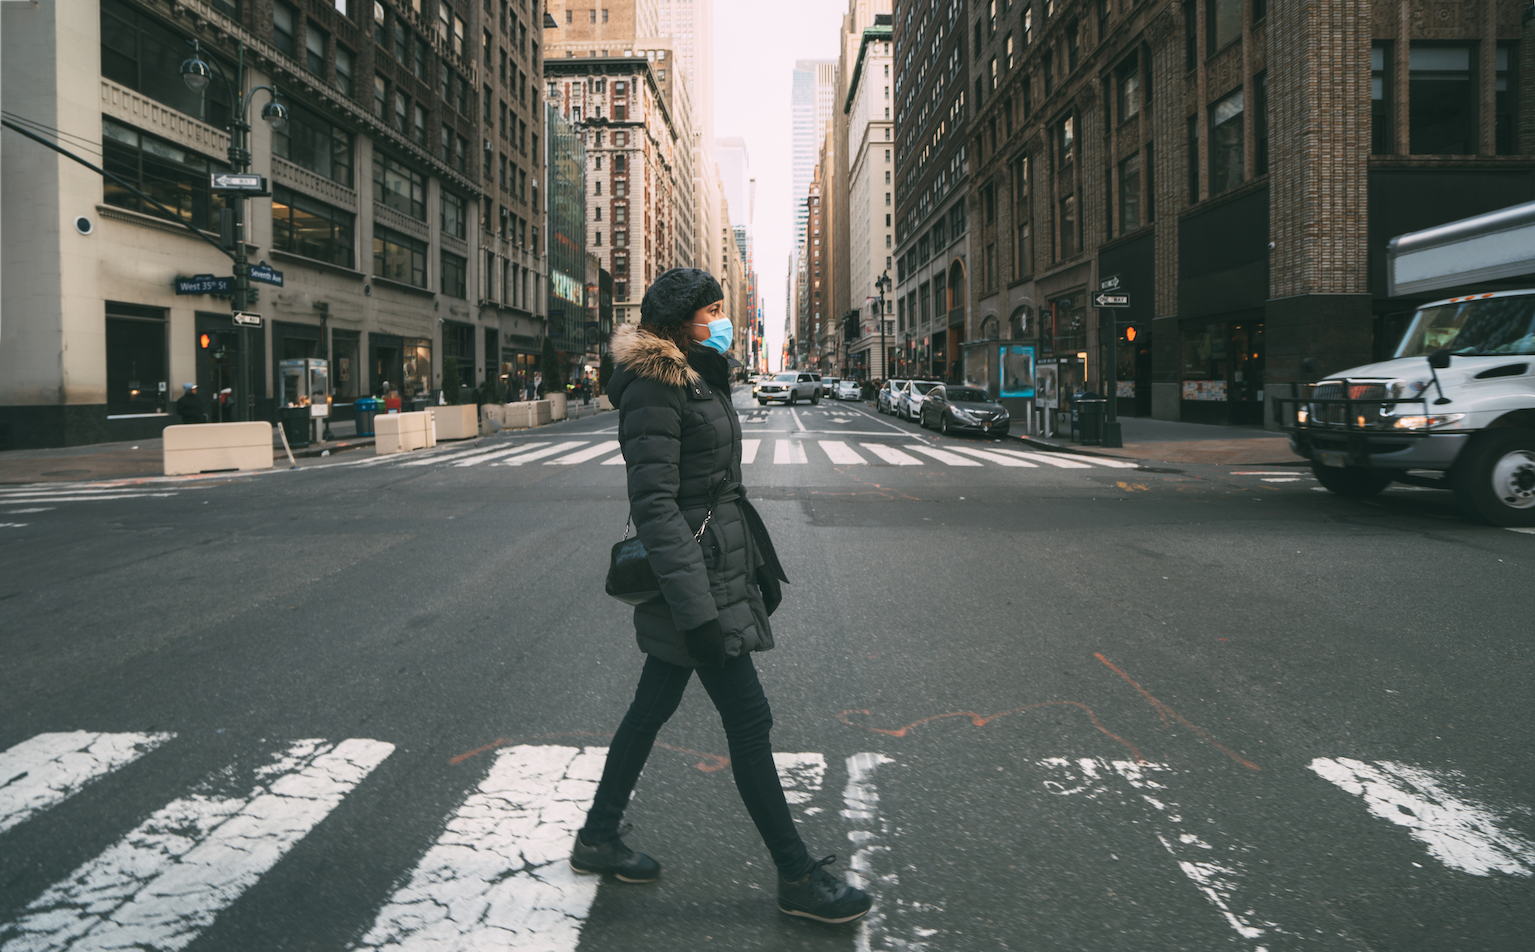 BIG APPLE LIKE NEVER BEFORE: A pedestrian crosses the street in a deserted Manhattan